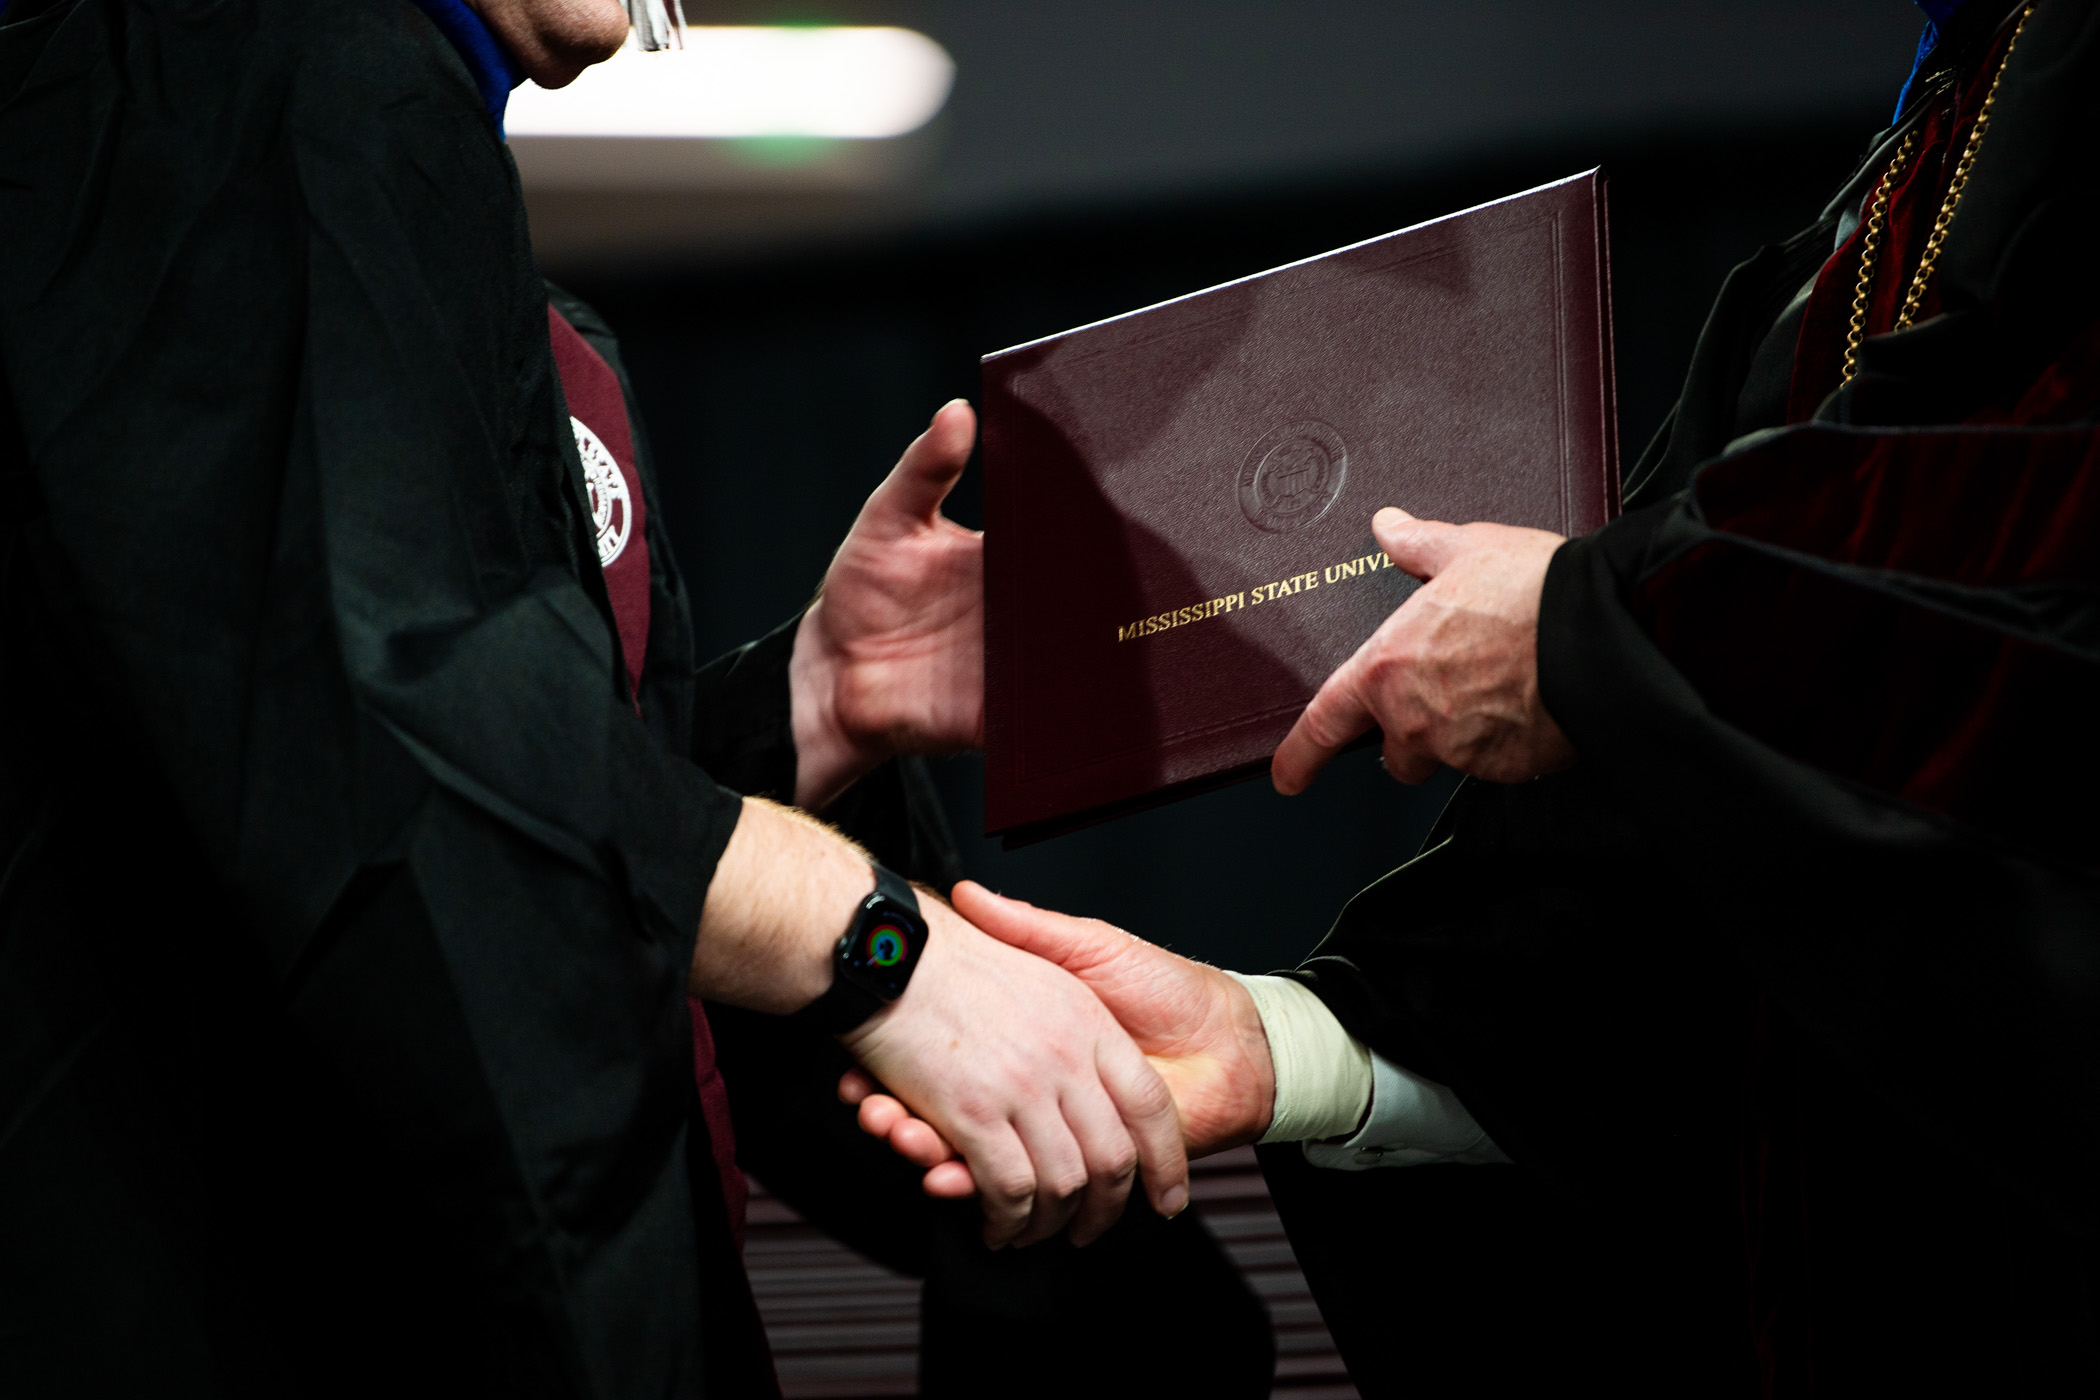 MSU President hands off a diploma to a graduate, signifying the end of an academic journey and start to a new chapter. v